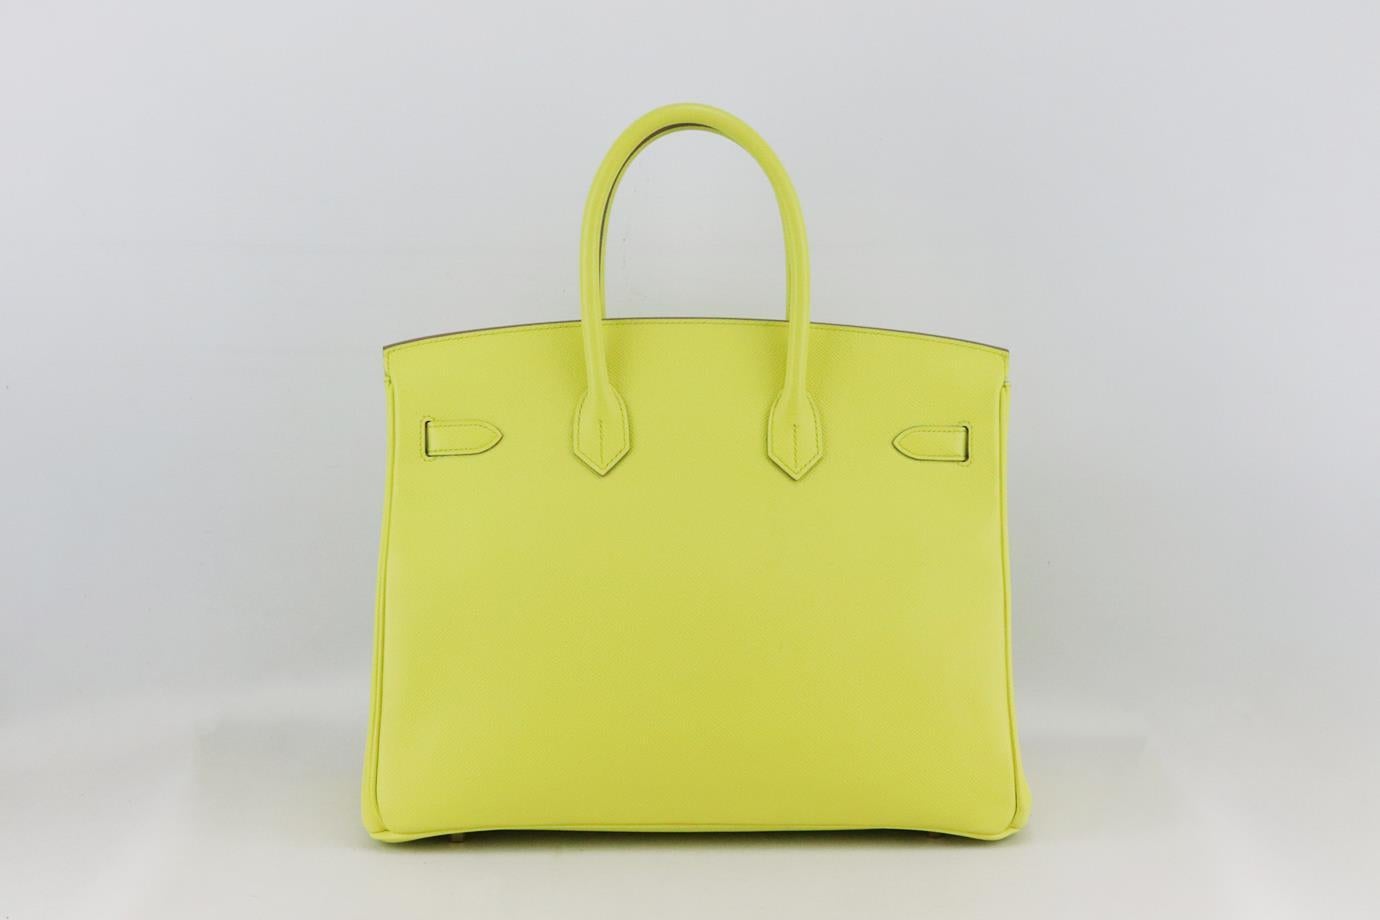 Hermès 2011 Birkin 35cm Epsom Leather Bag In Excellent Condition For Sale In London, GB